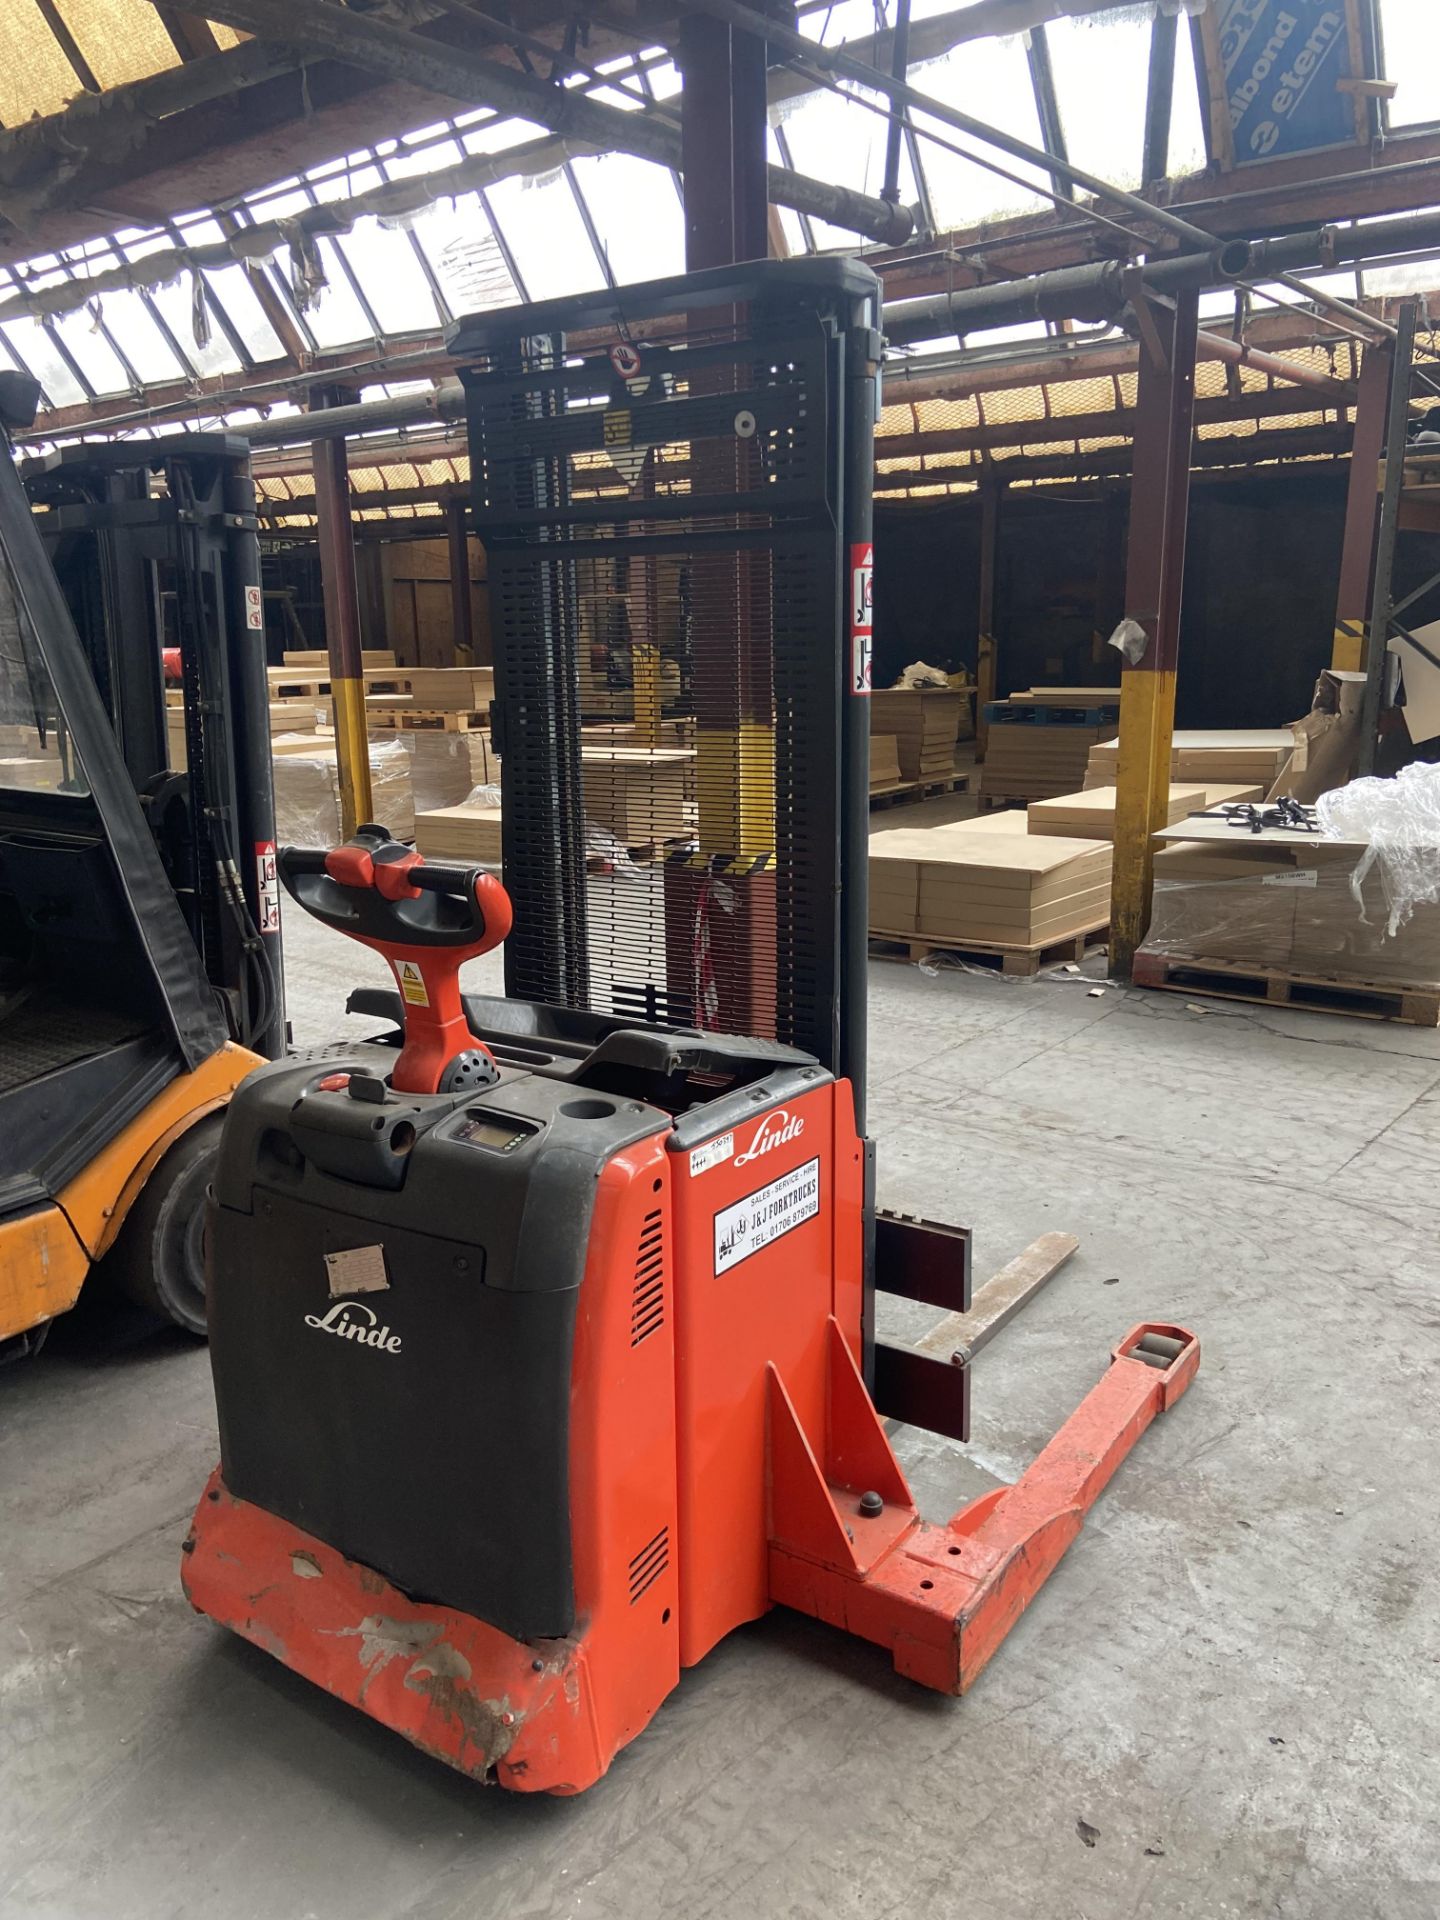 Linde L14AS 1400kg cap. Electric Pedestrian Operated Fork Lift Truck, 3370mm max. lift height, - Image 4 of 7